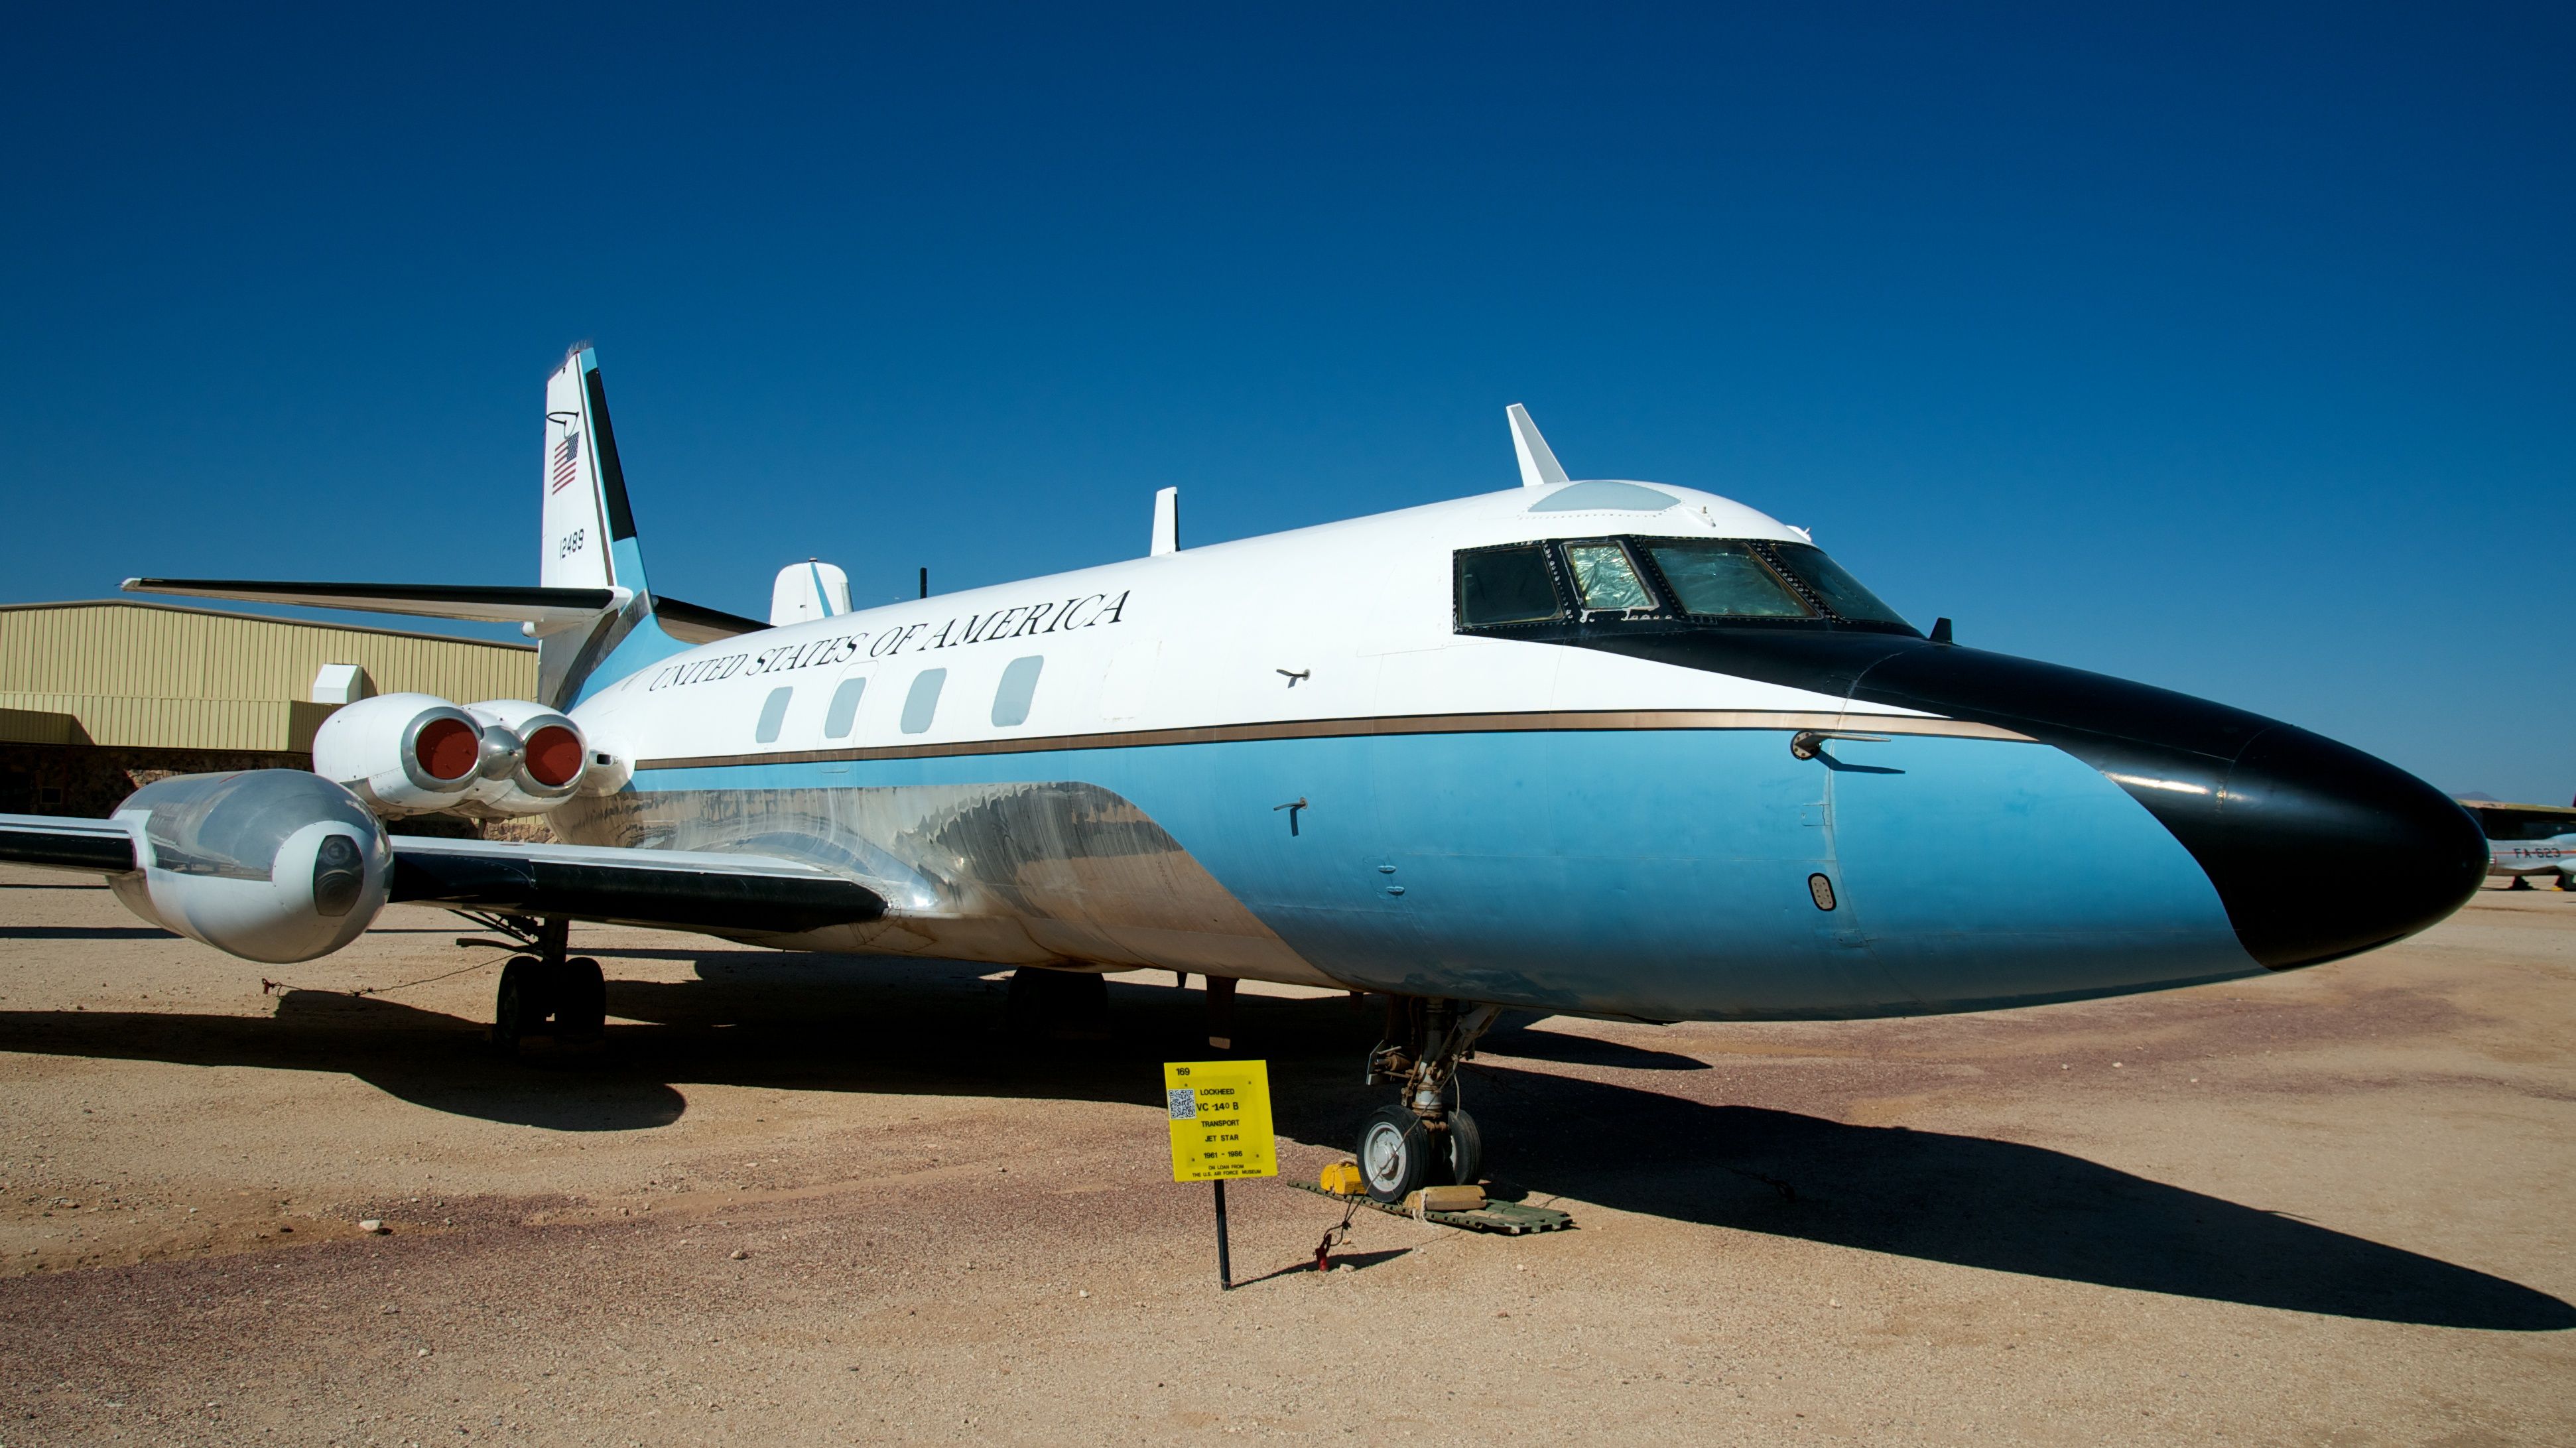 A Lockheed Jetstar parked at an airport.